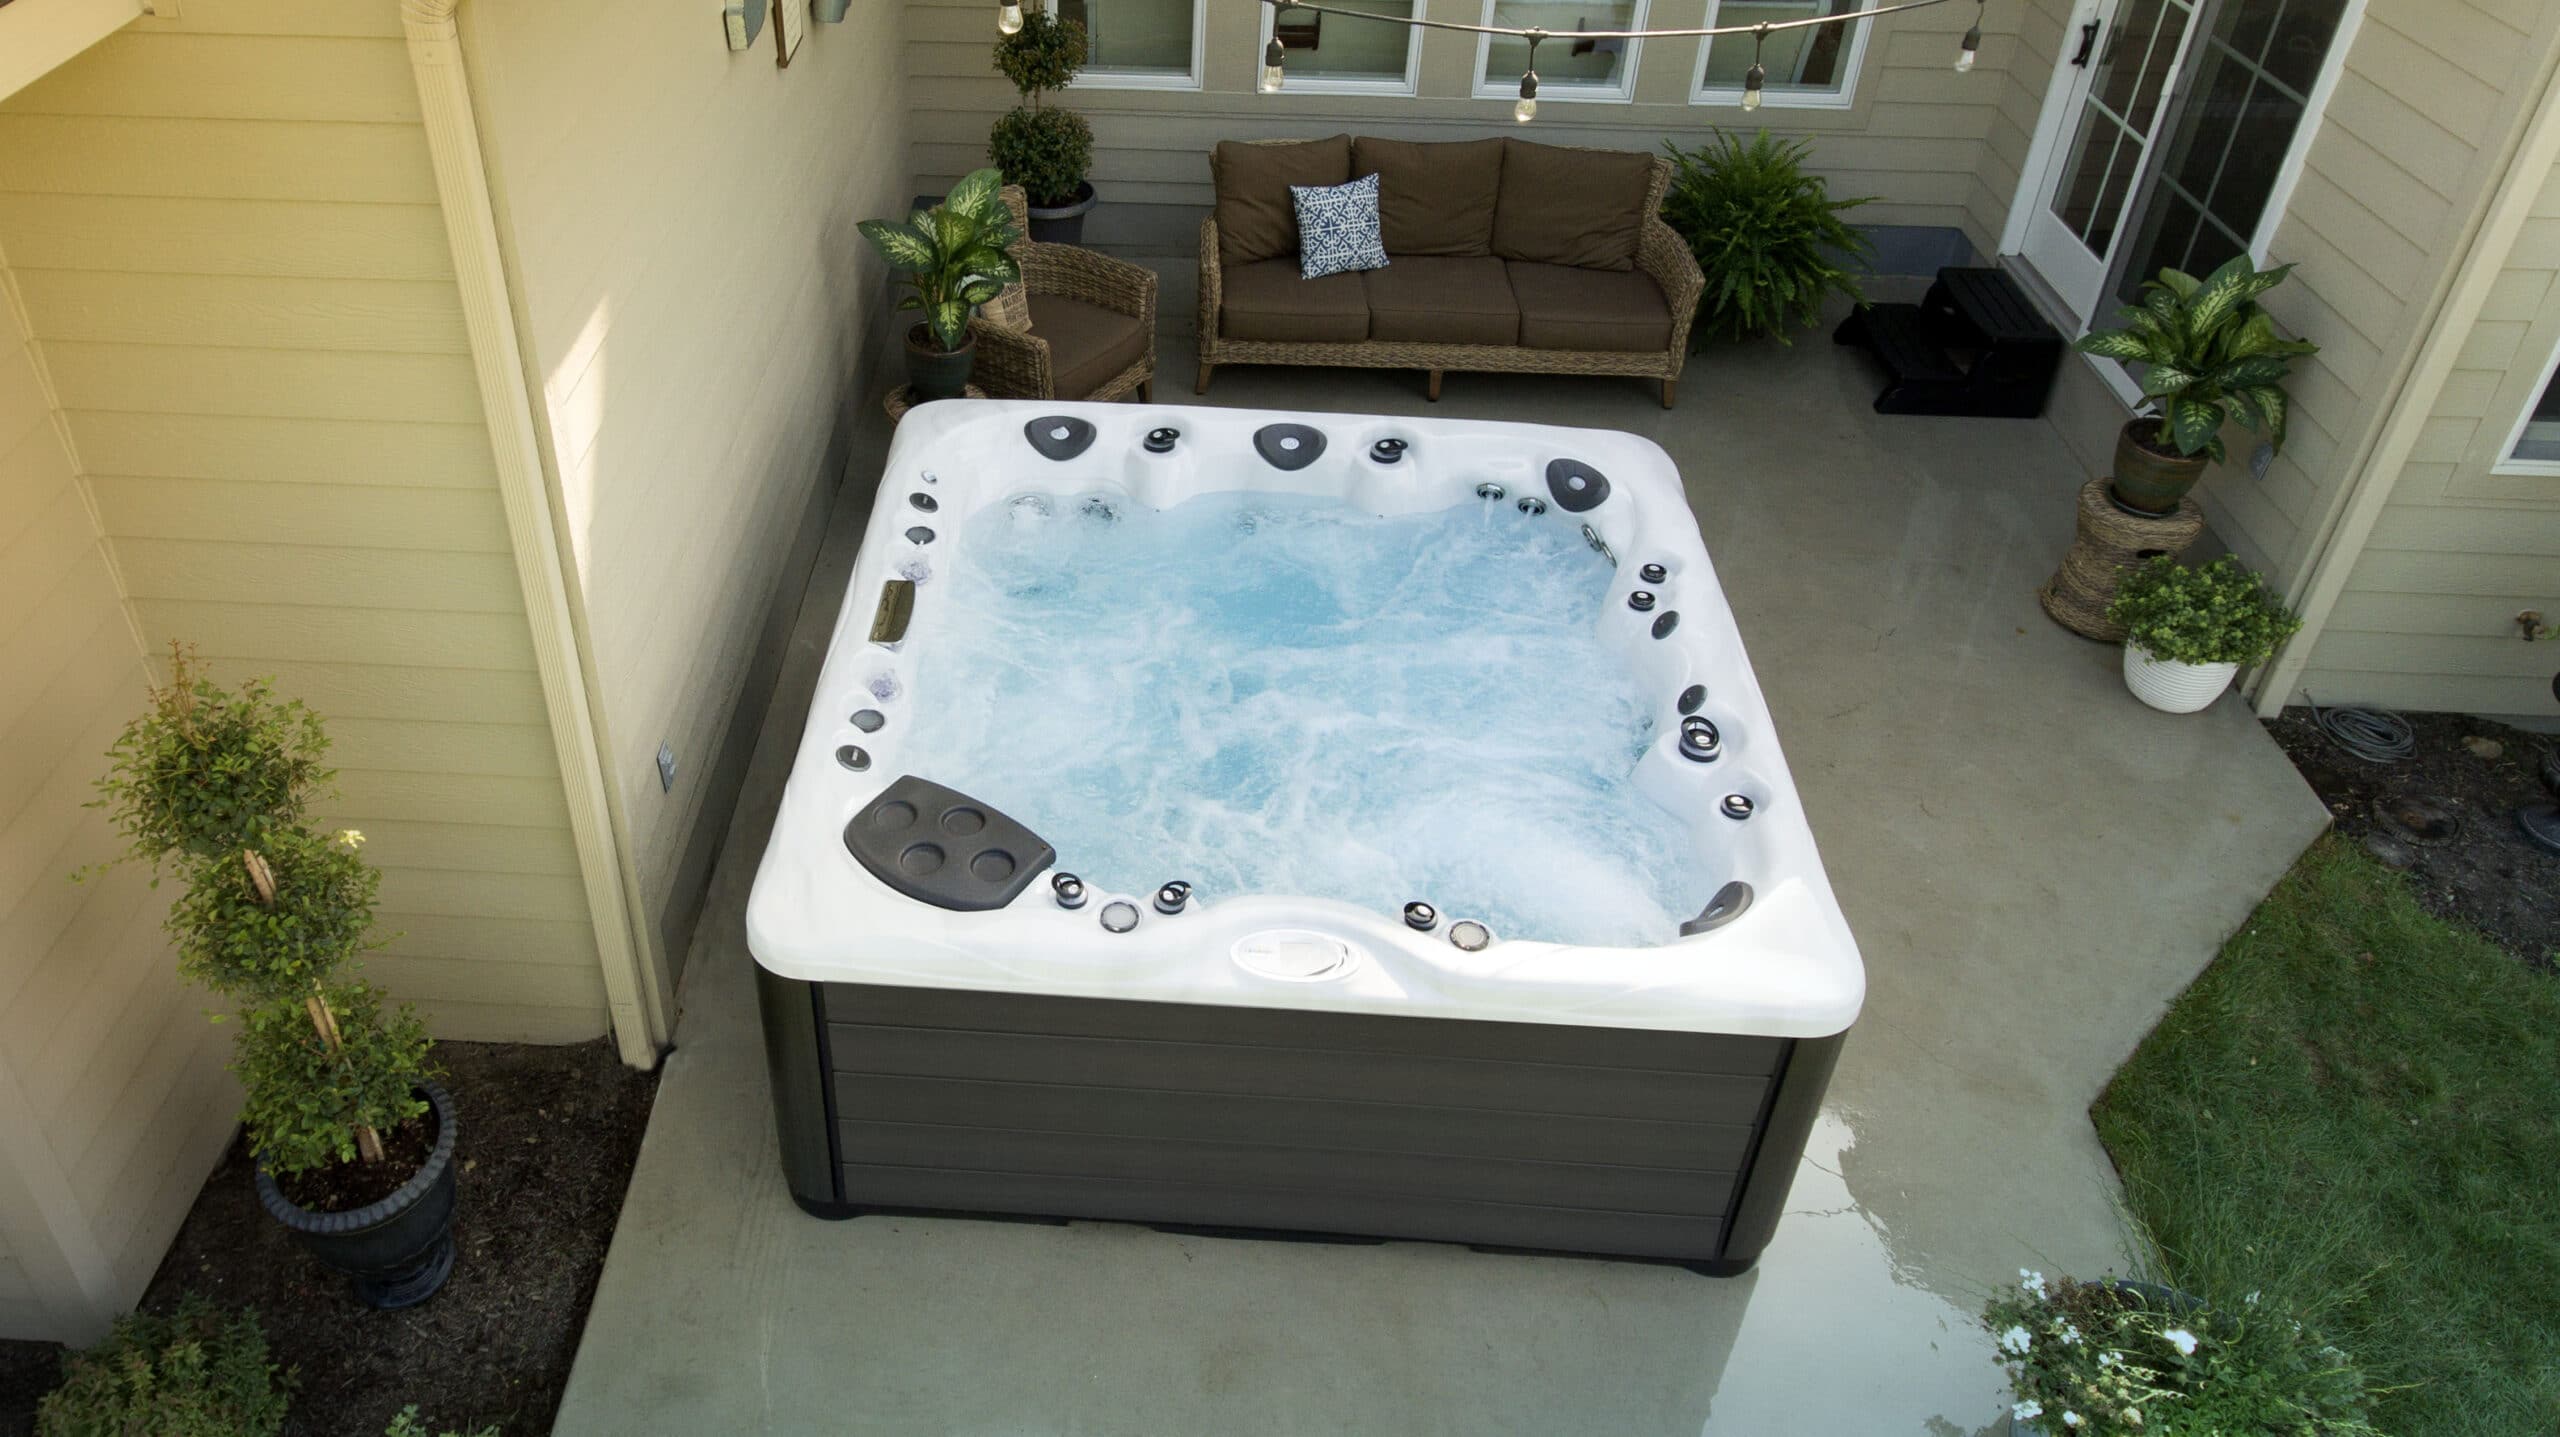 What Are The Dimensions Of A Hot Tub - www.inf-inet.com